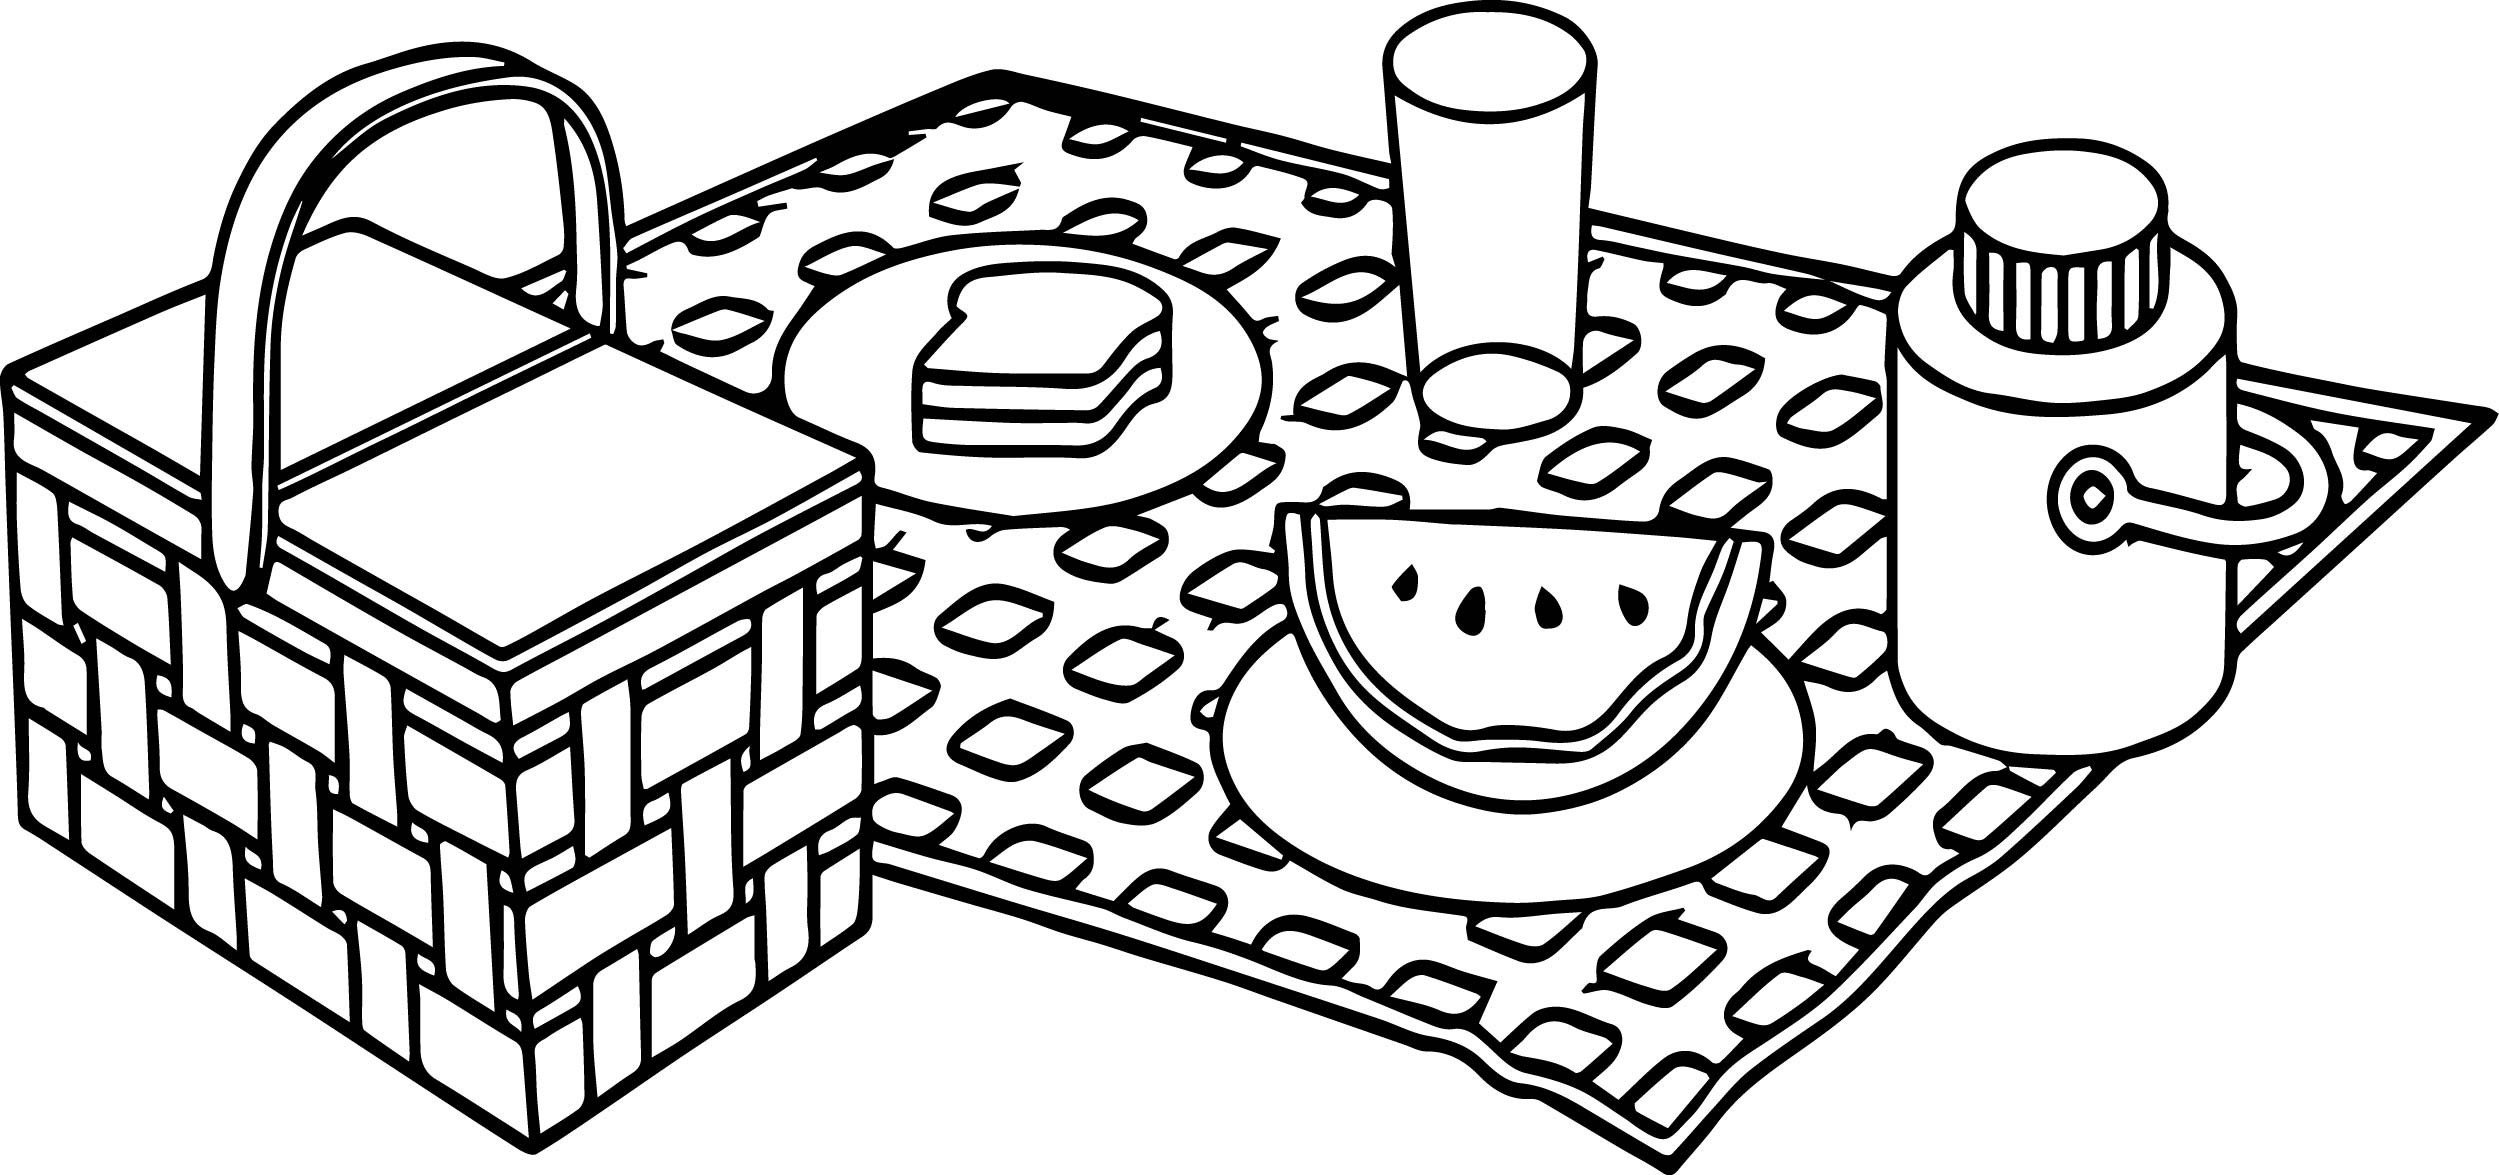 Picnic Coloring Pages Coloring Pages